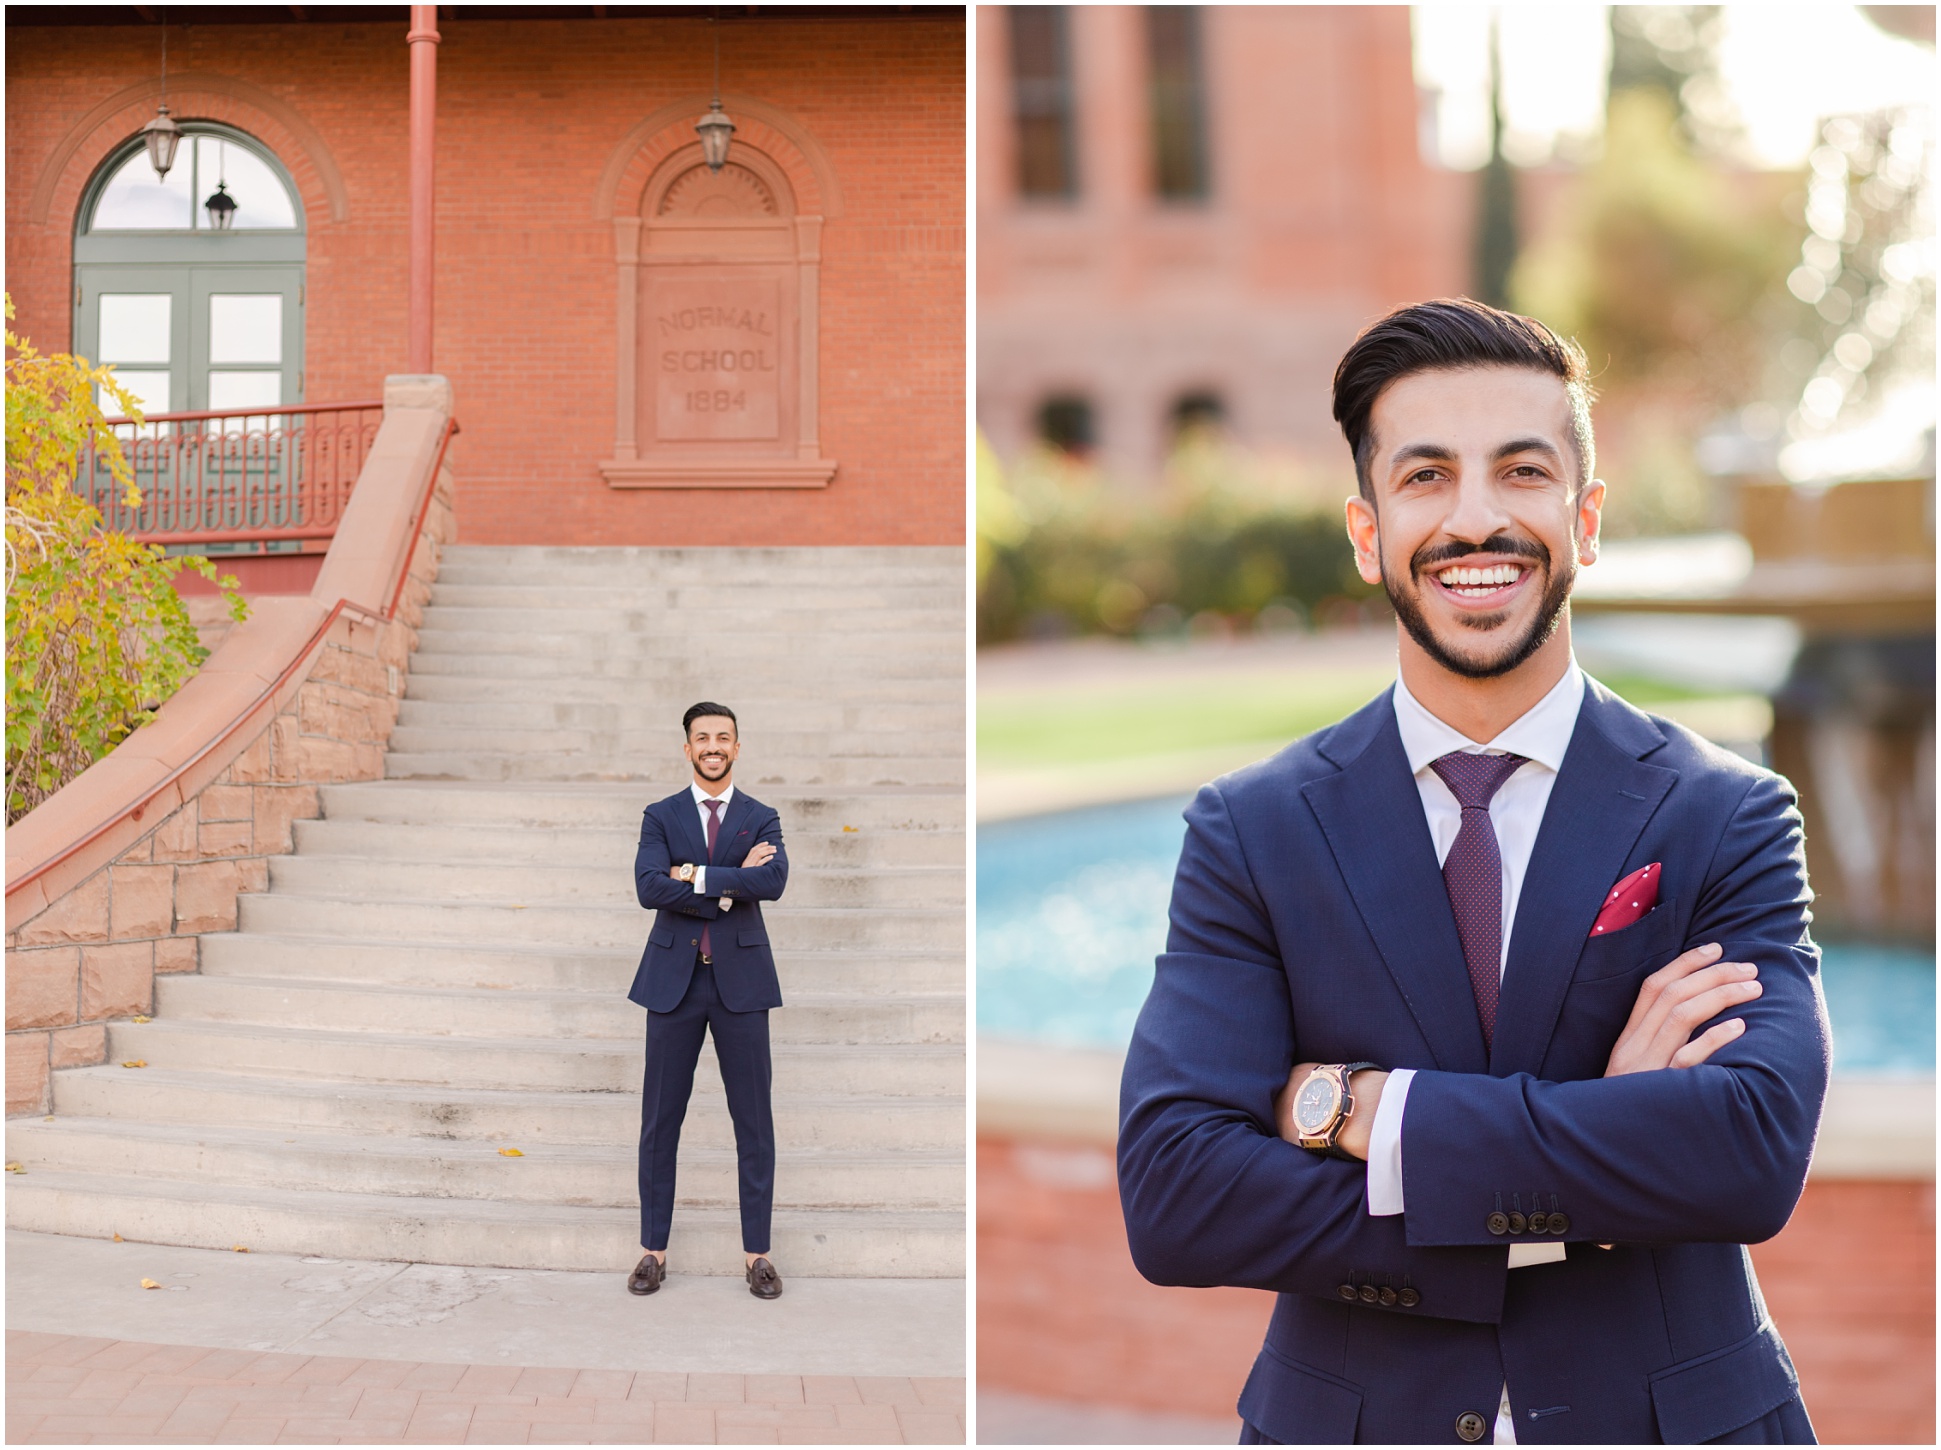 Male college student crossing his arms in front of big staircase; ASU graduate crossing arms in front of water fountain and smiling at camera